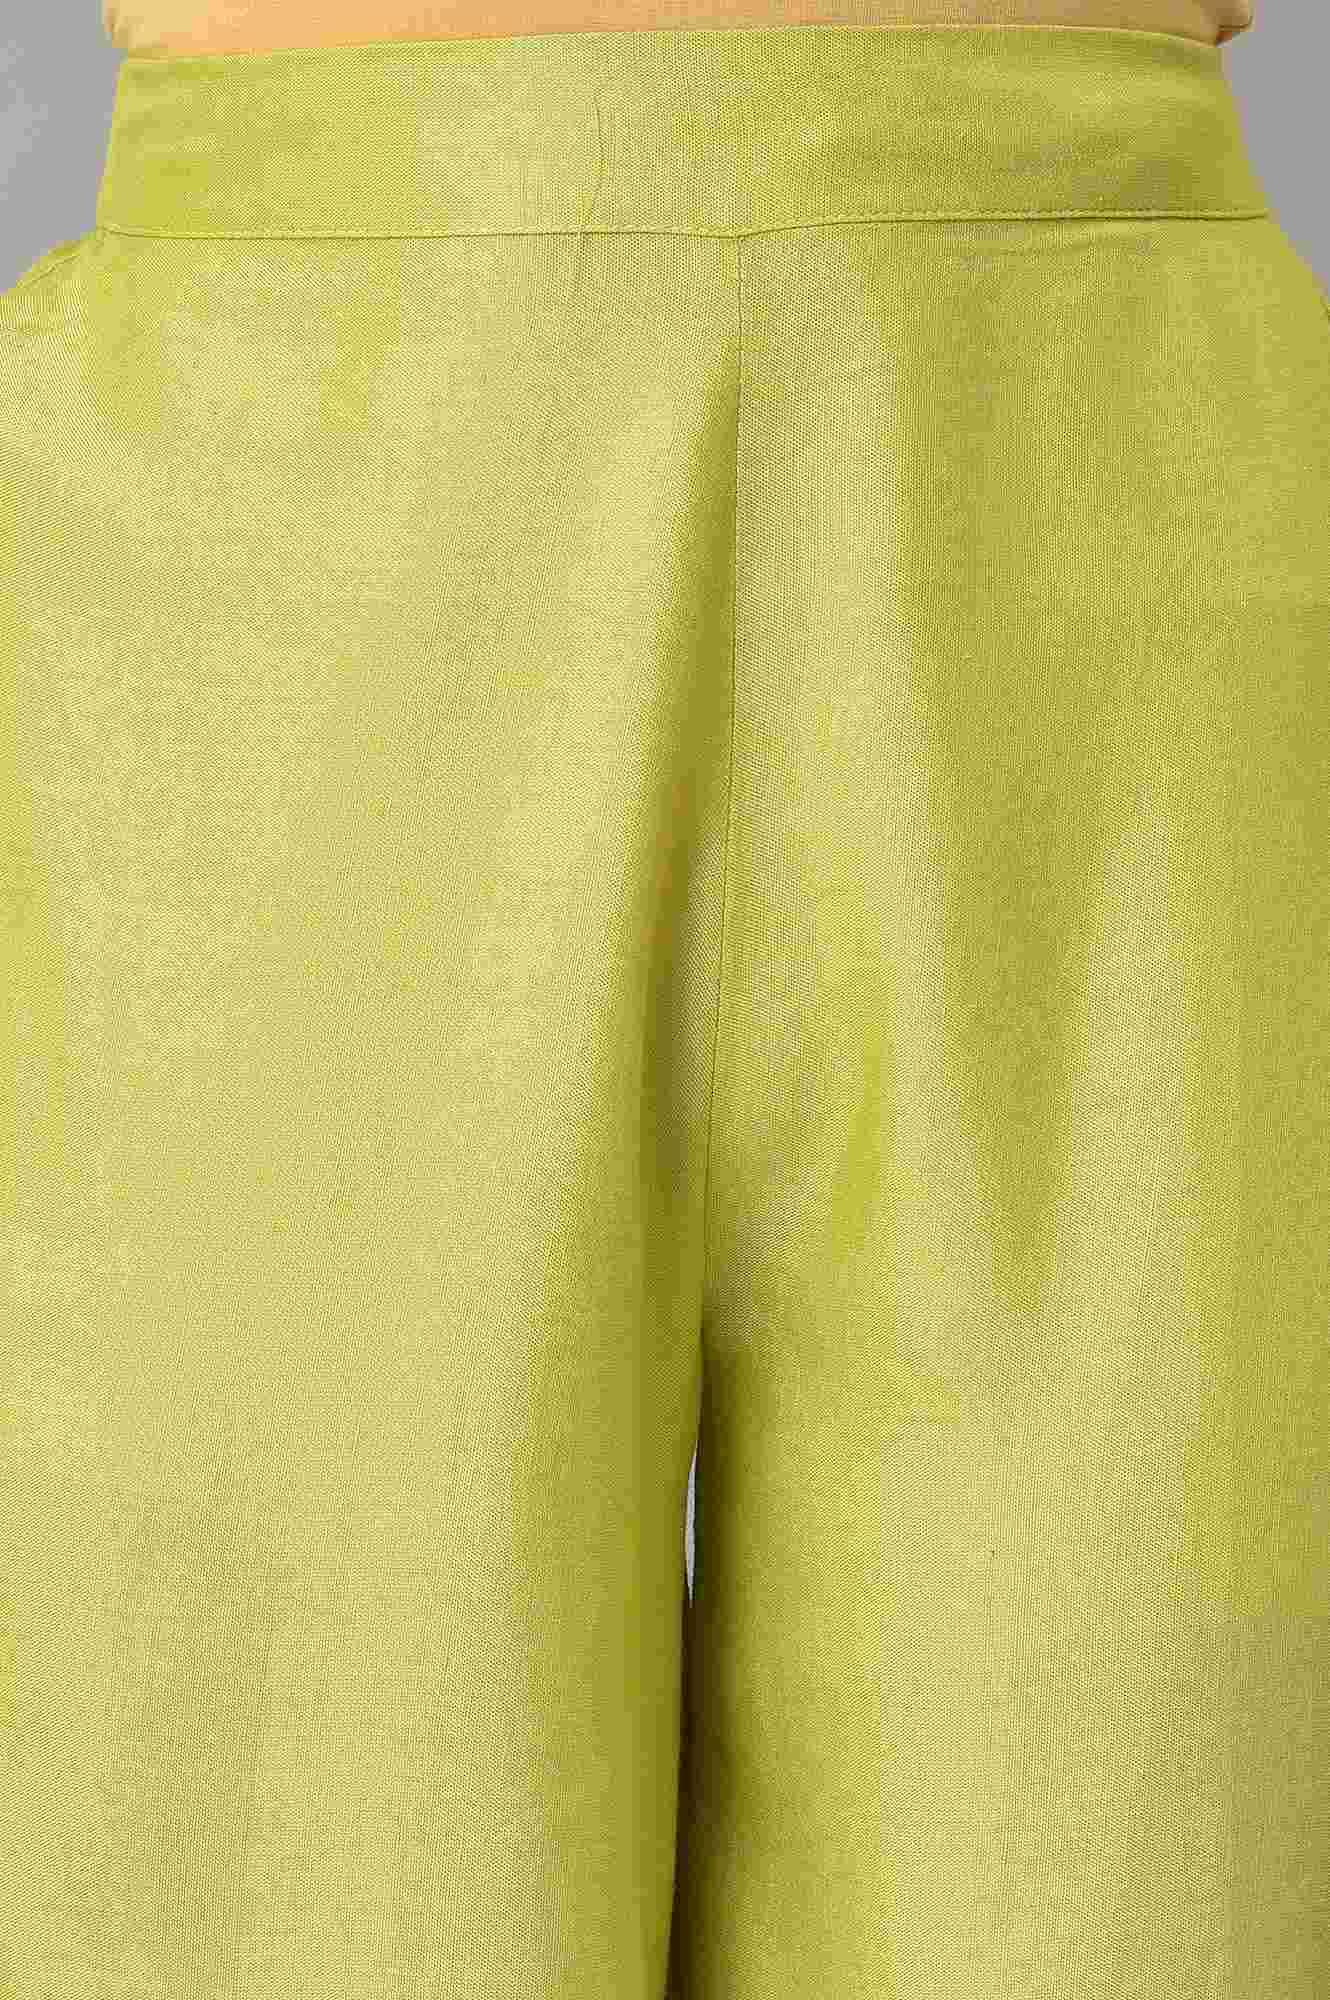 Light Green Slim Pants With Lace Detail - wforwoman